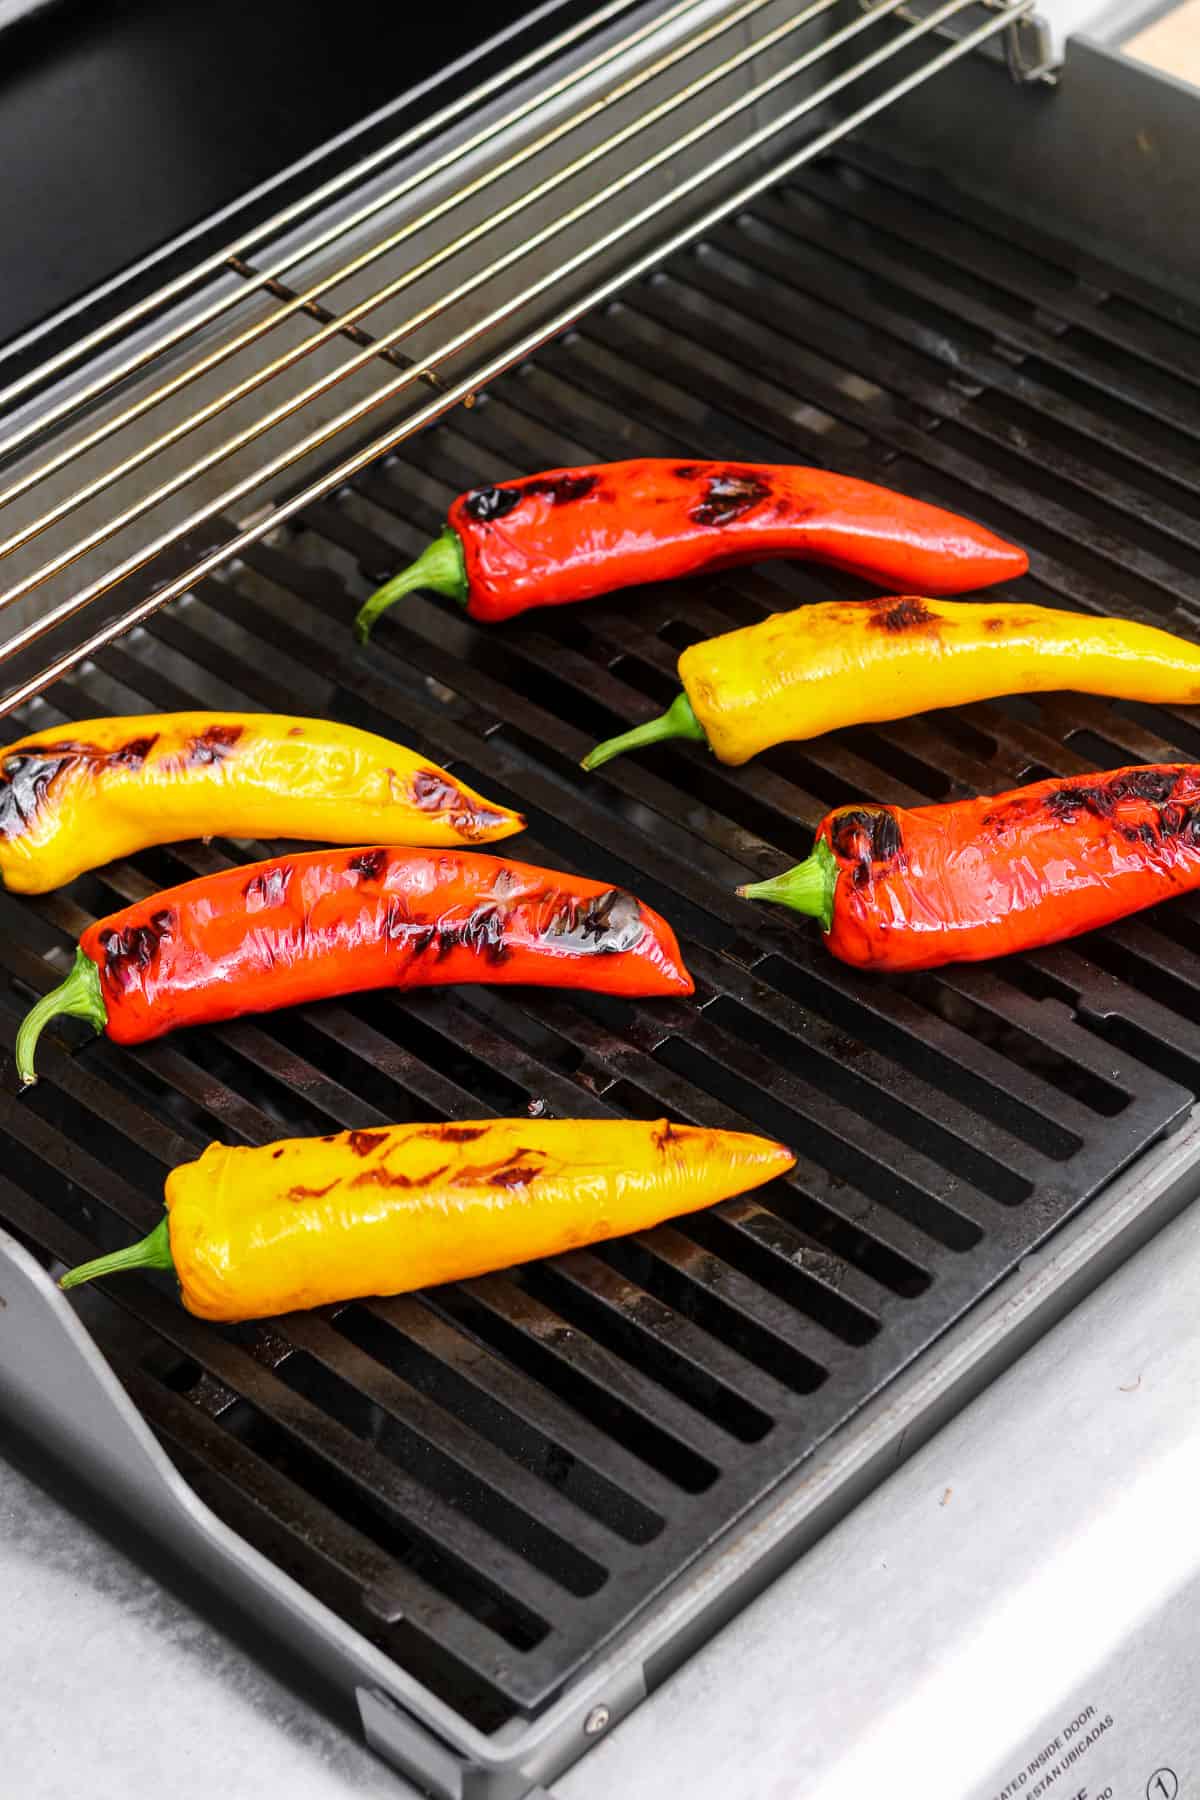 Long peppers on grill.